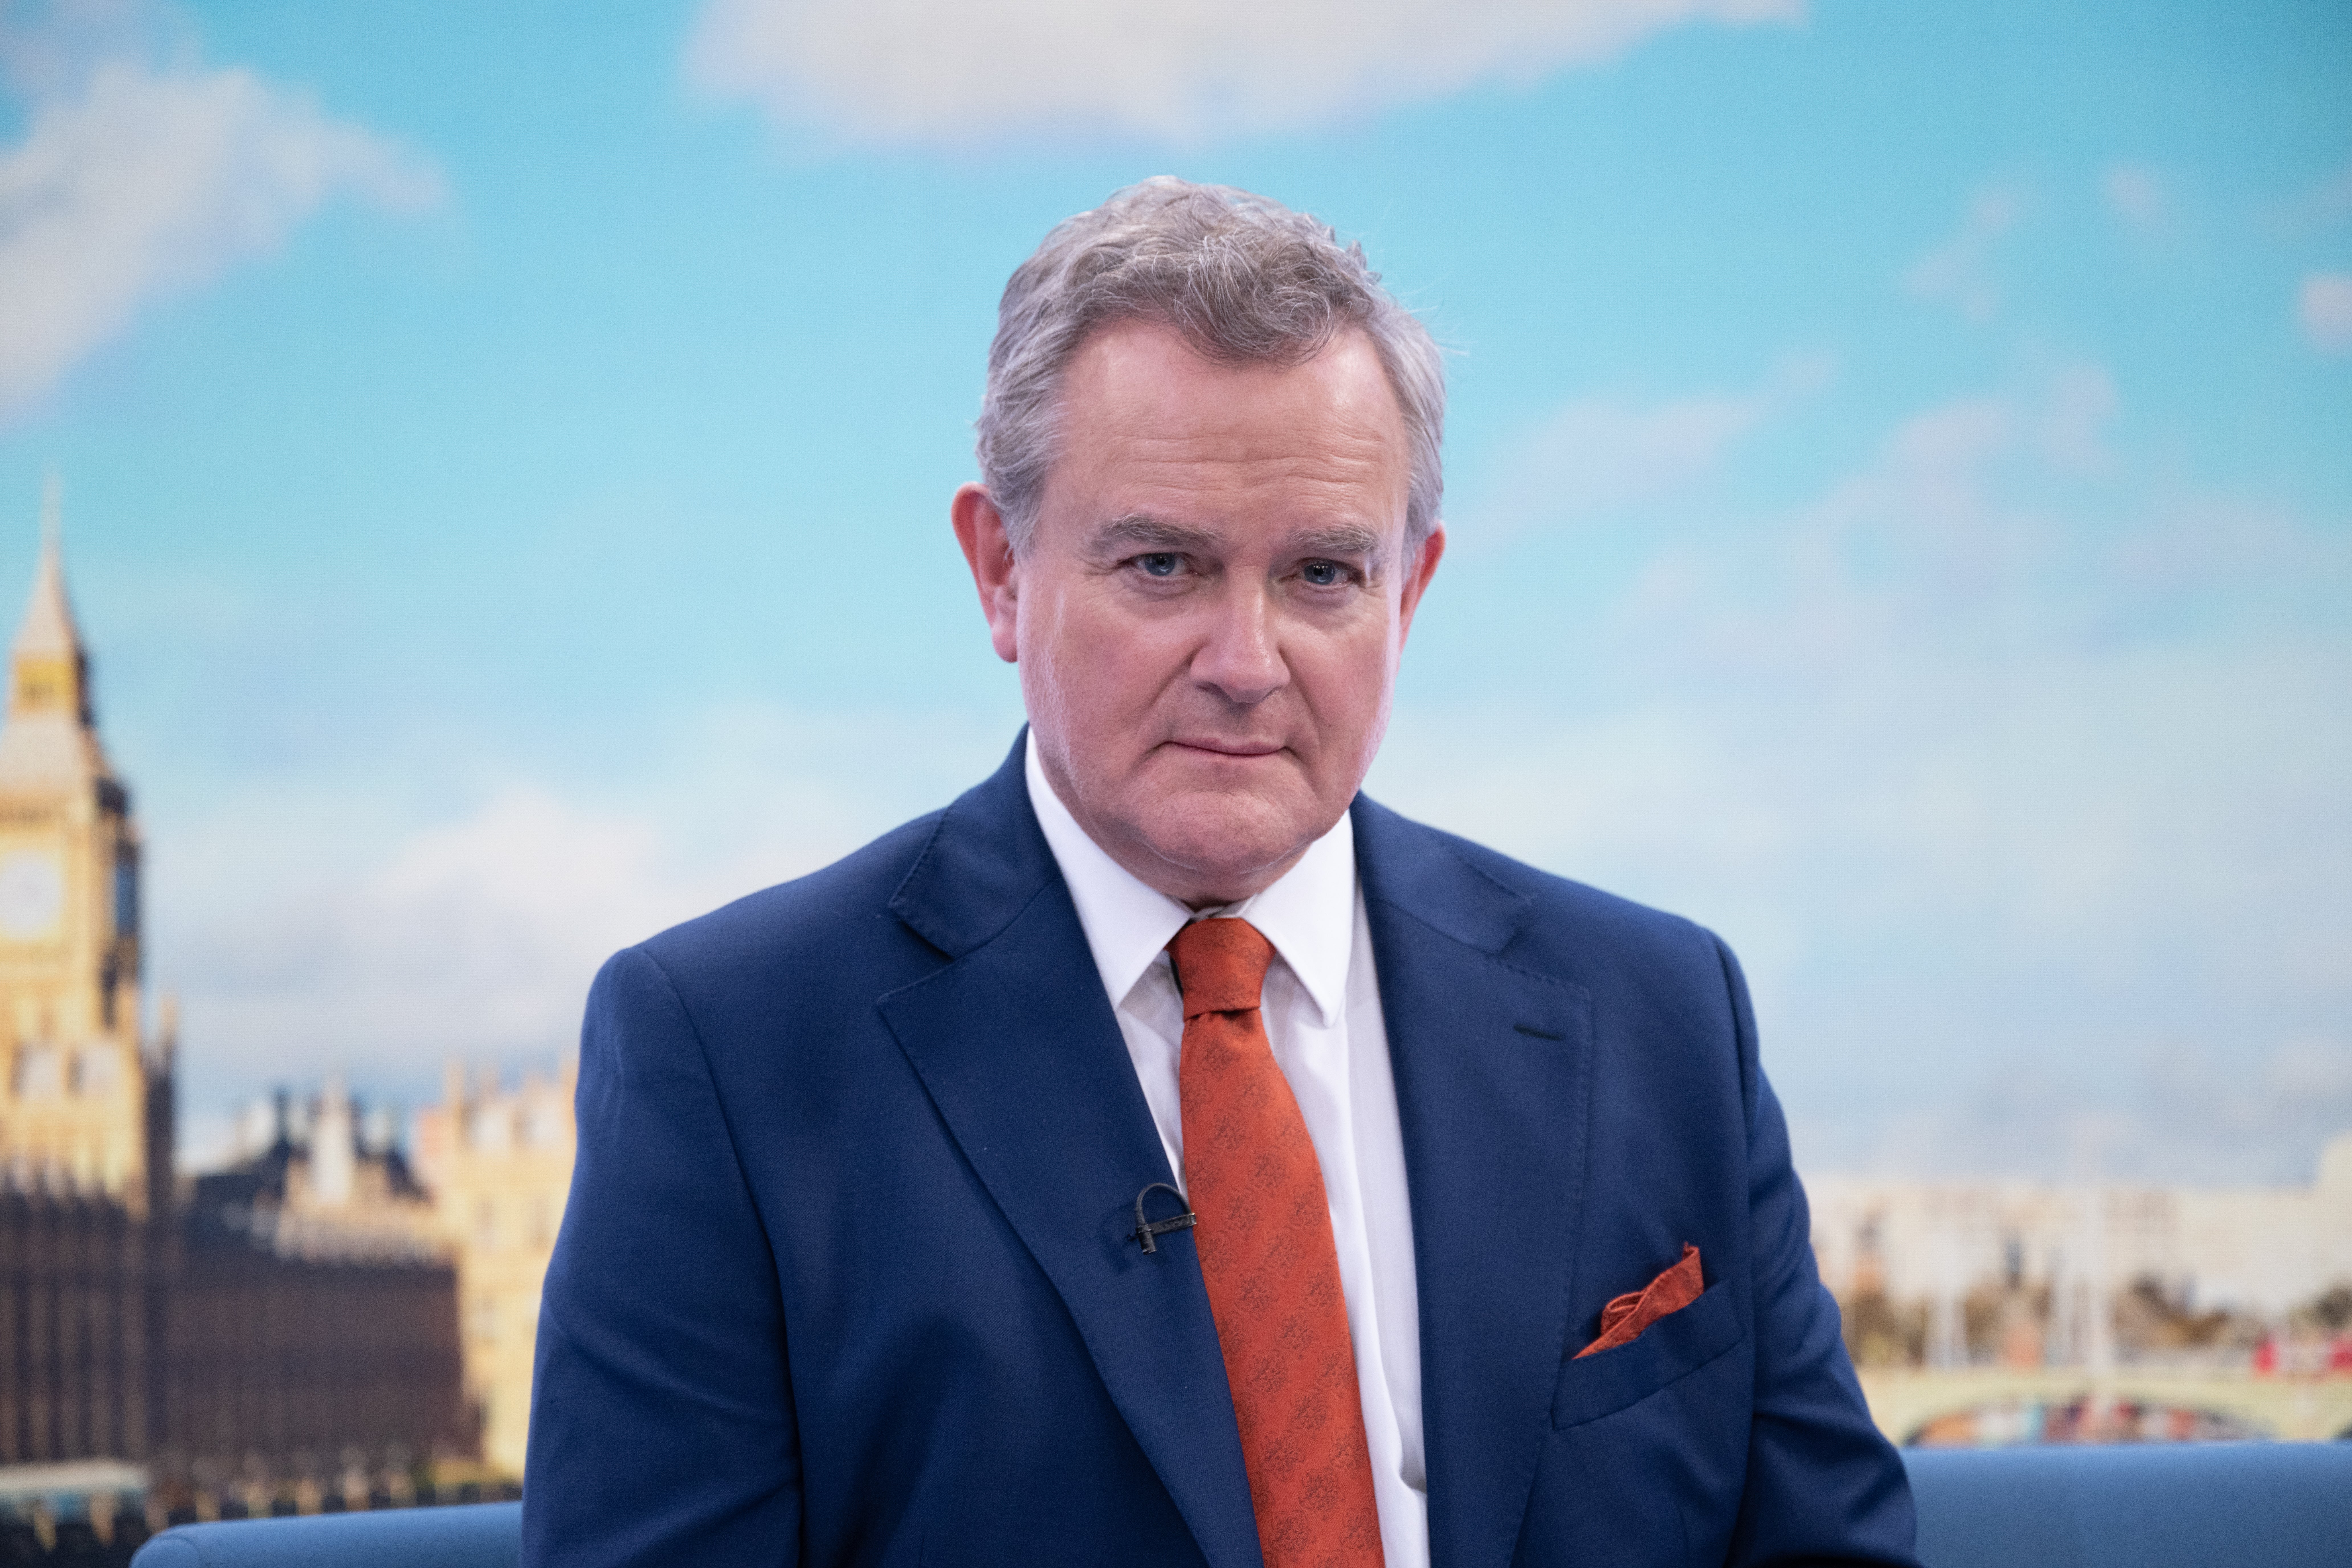 hugh bonneville, douglas is cancelled review: cancel culture drama offers only sermons, moral binaries and easy answers